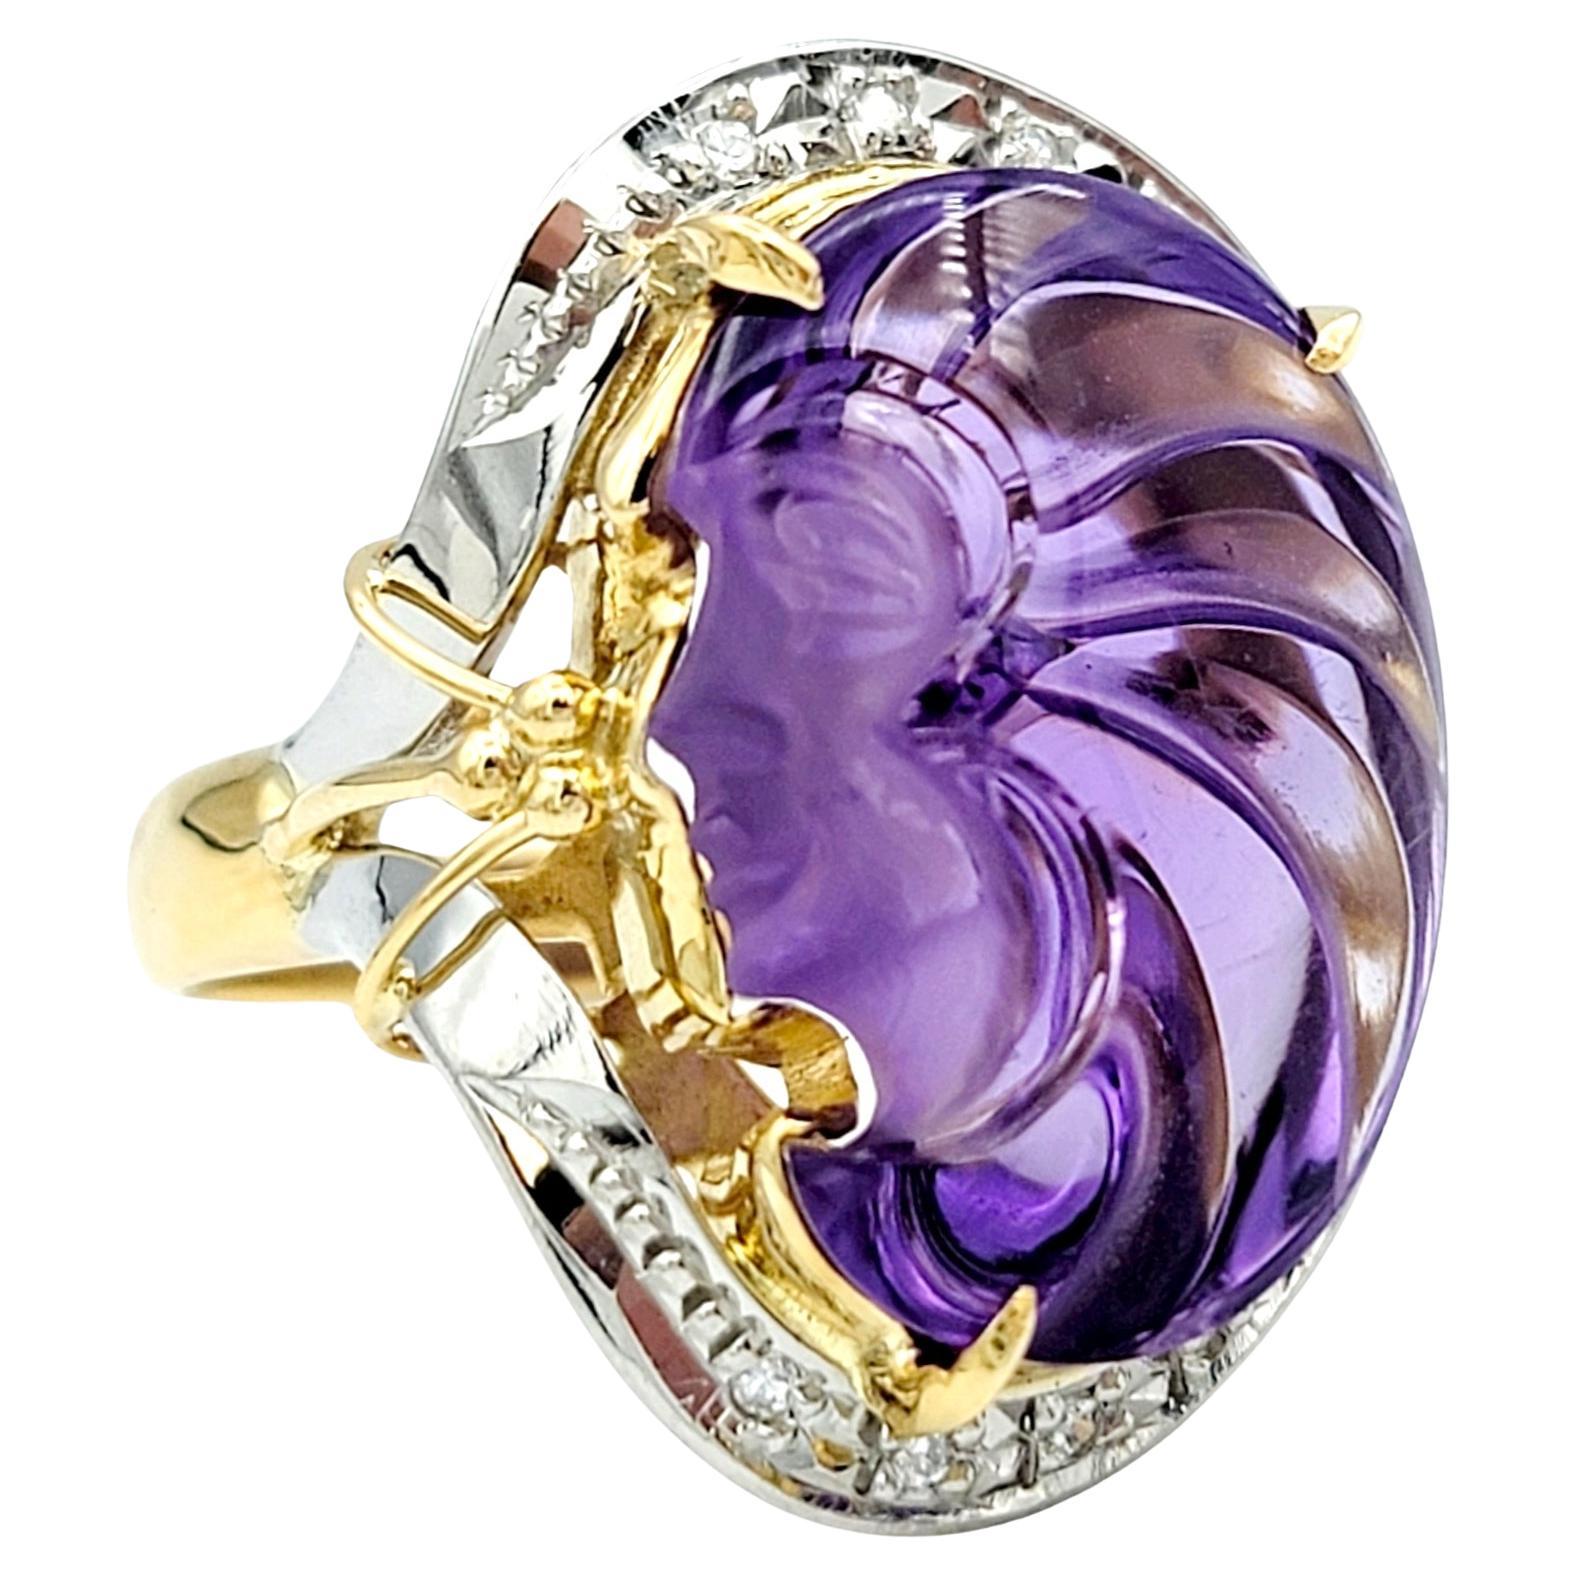 Carved Amethyst Profile and Diamond Ring in 18 Karat Yellow Gold and Platinum